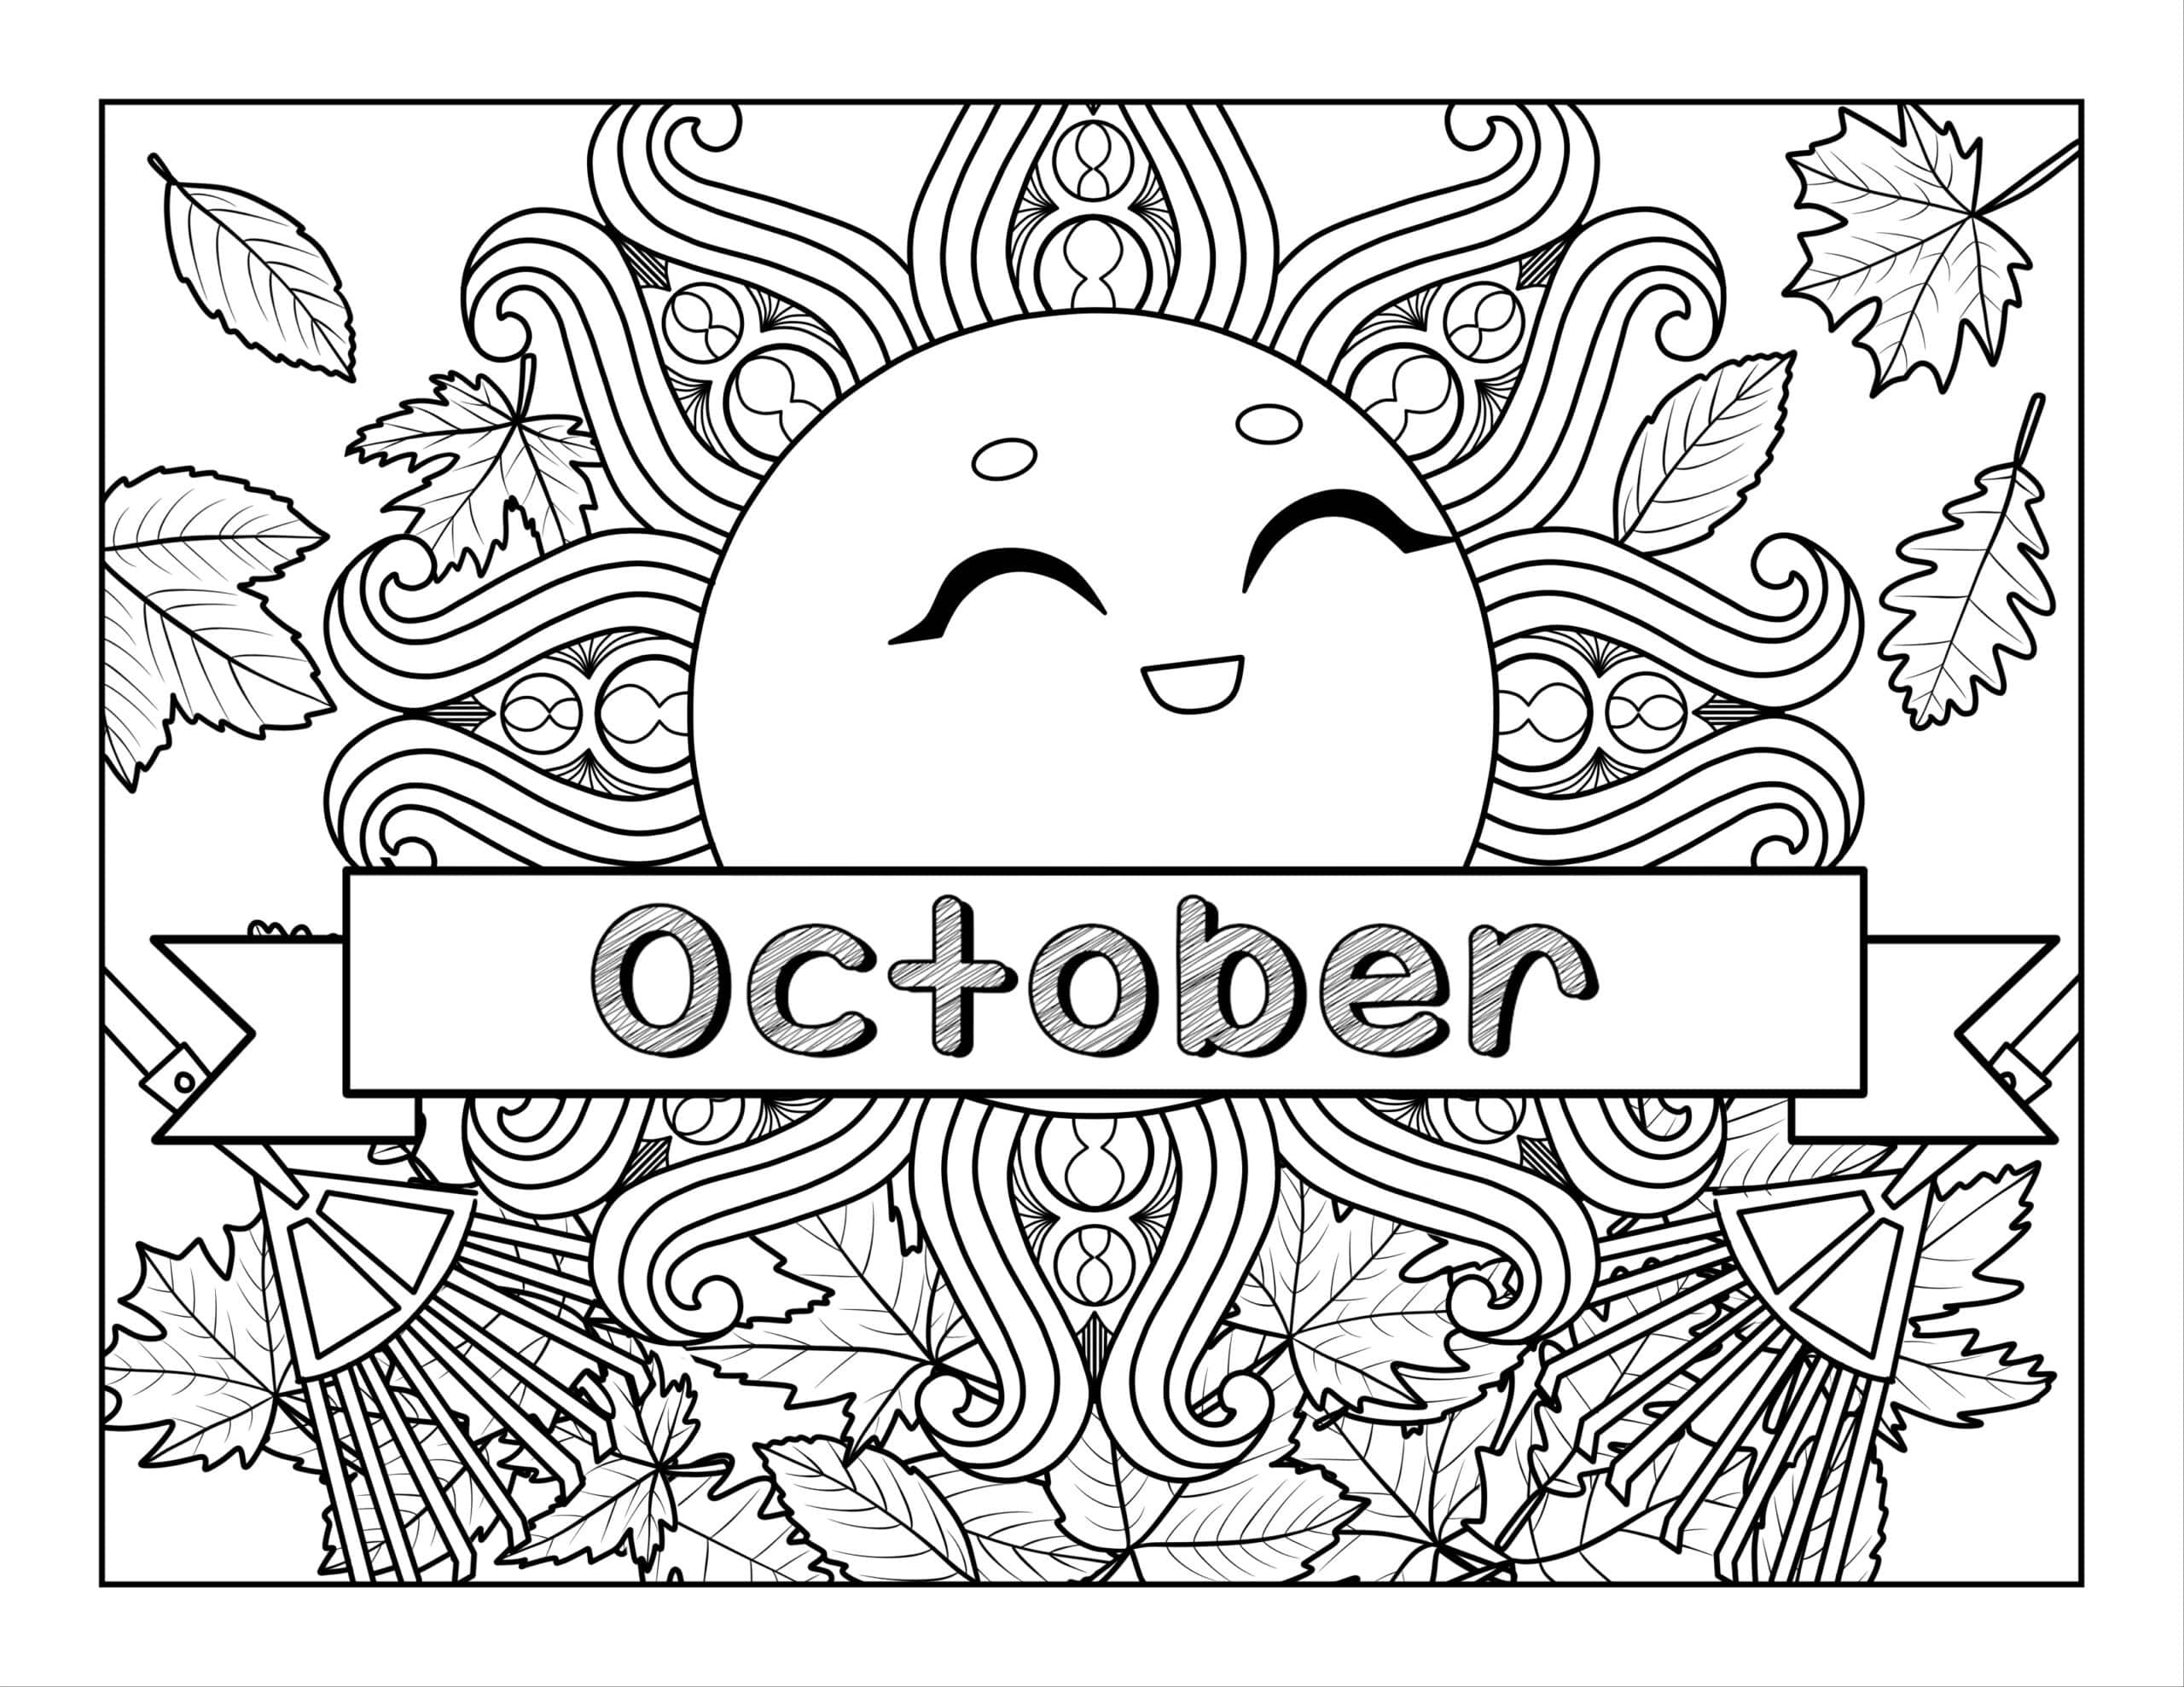 Coloring pages for october